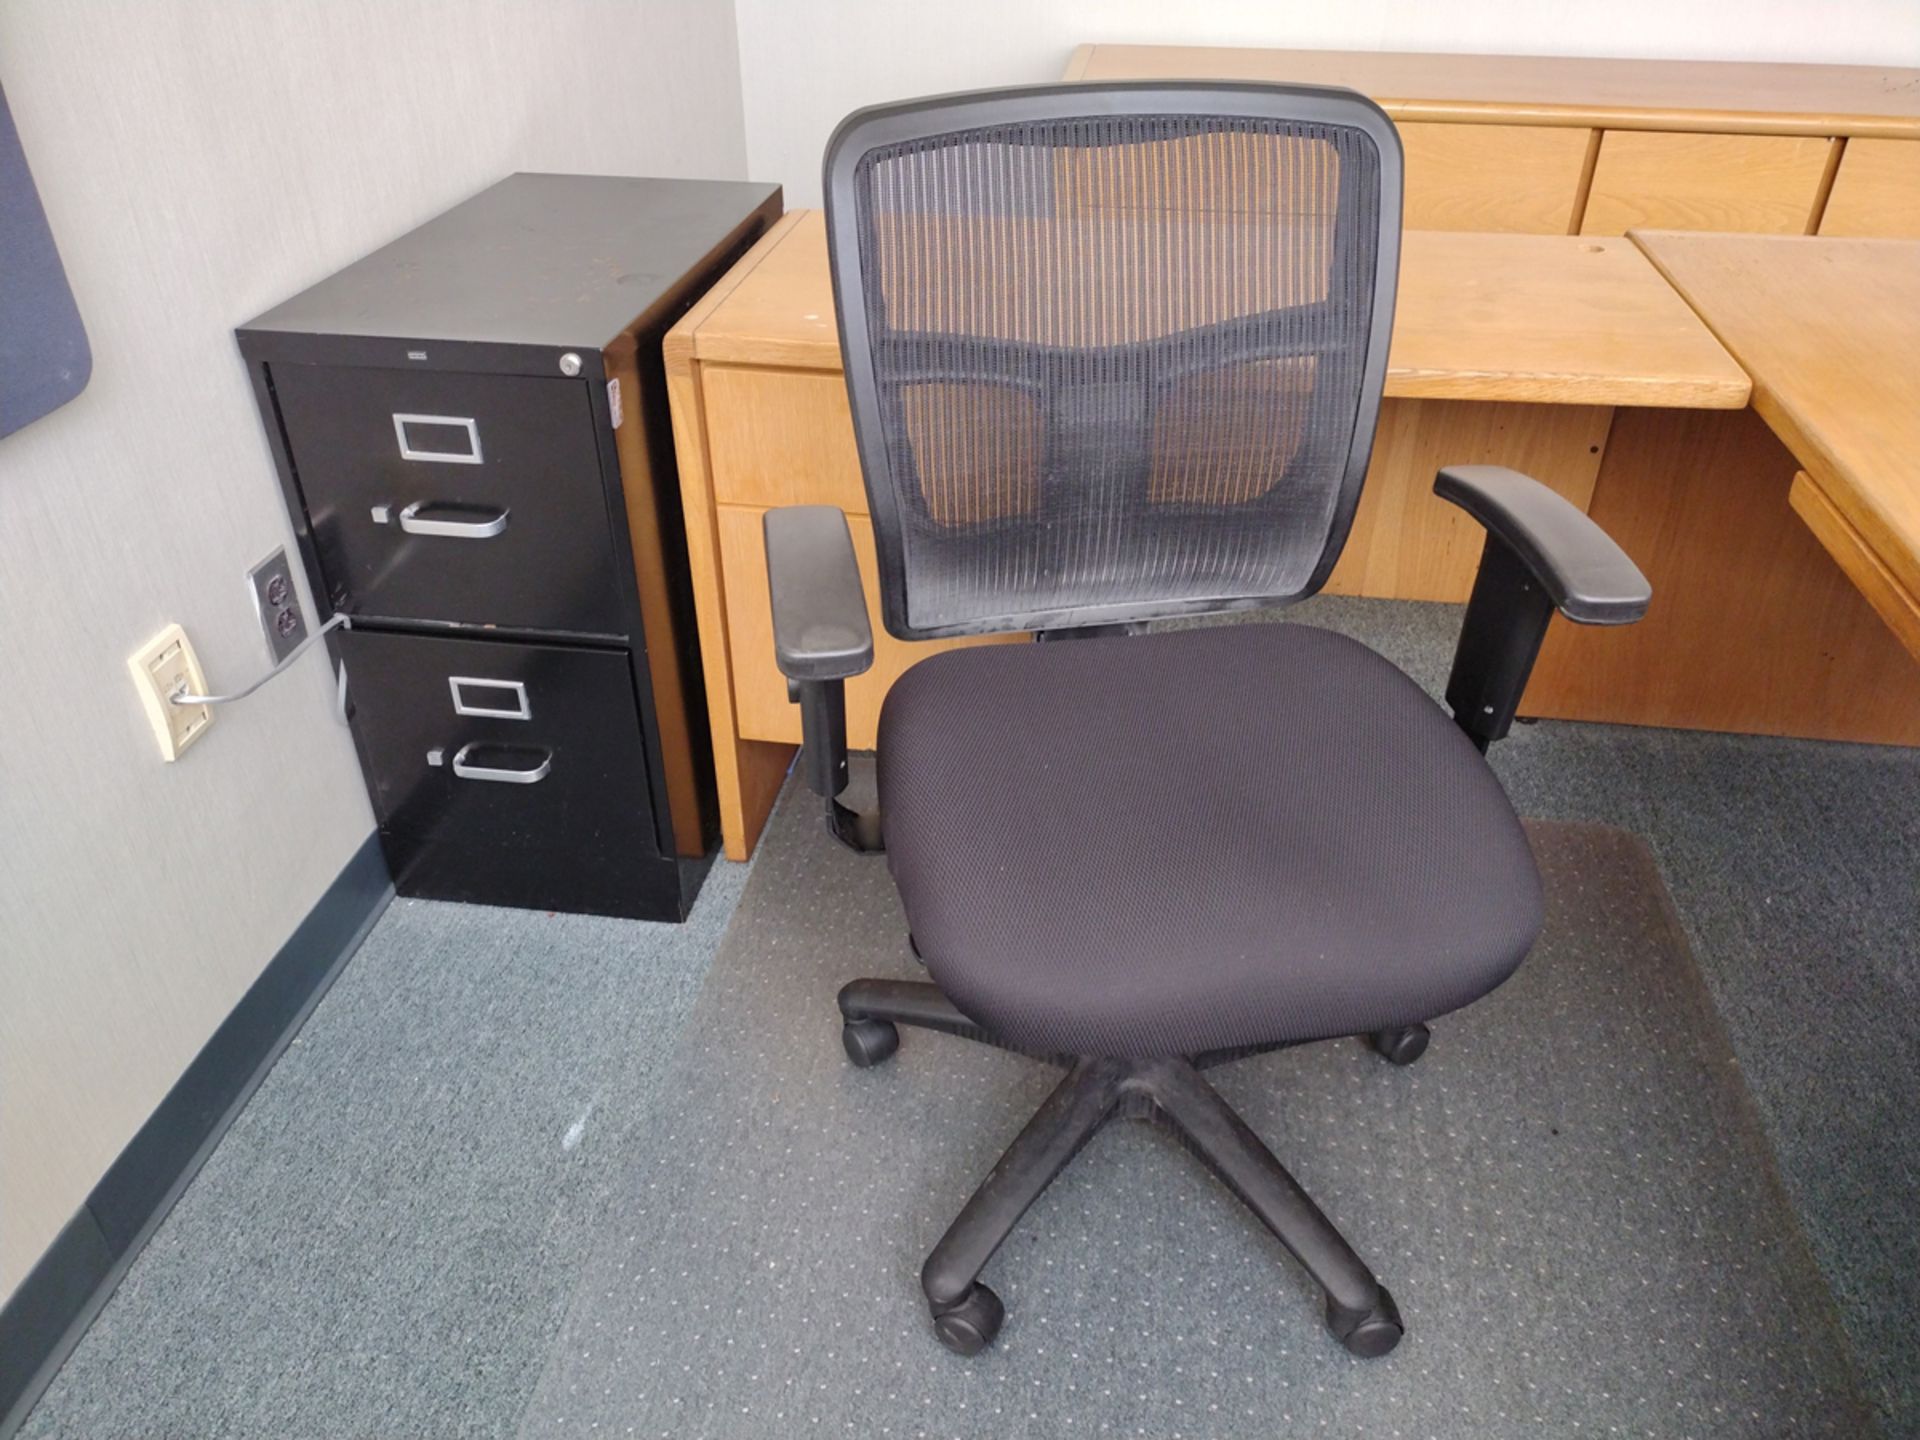 Group of Office Furniture Throughout Rooms - Image 6 of 8